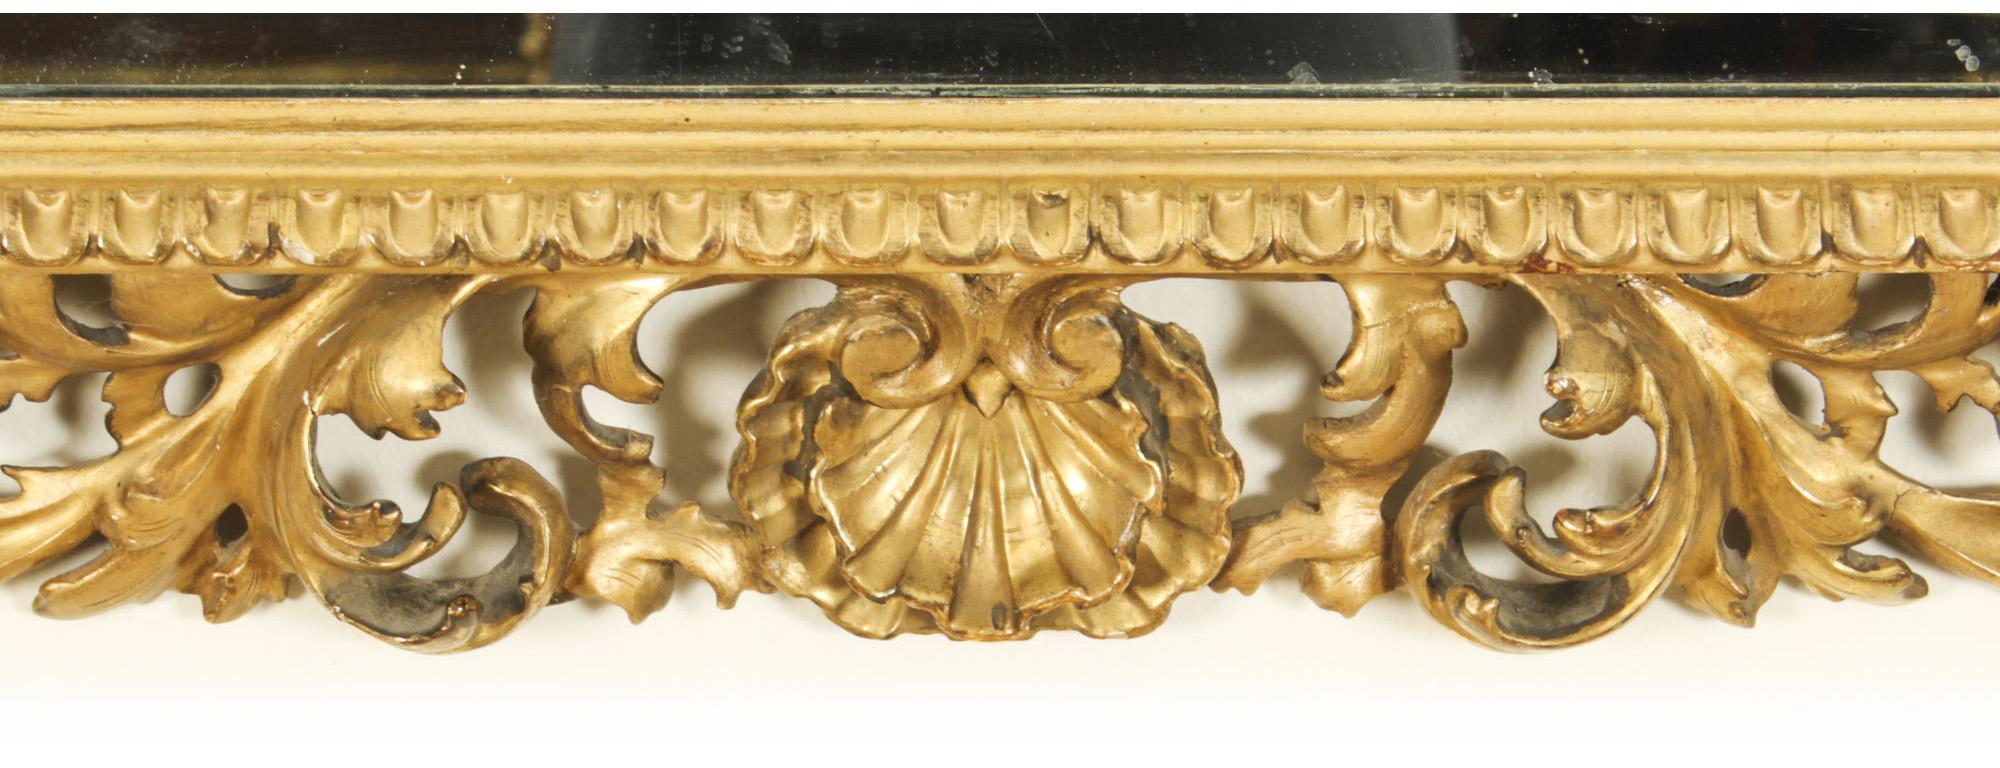 Antique Italian Giltwood Florentine Overmantle Mirror 19th Century - 86x102cm In Good Condition For Sale In London, GB